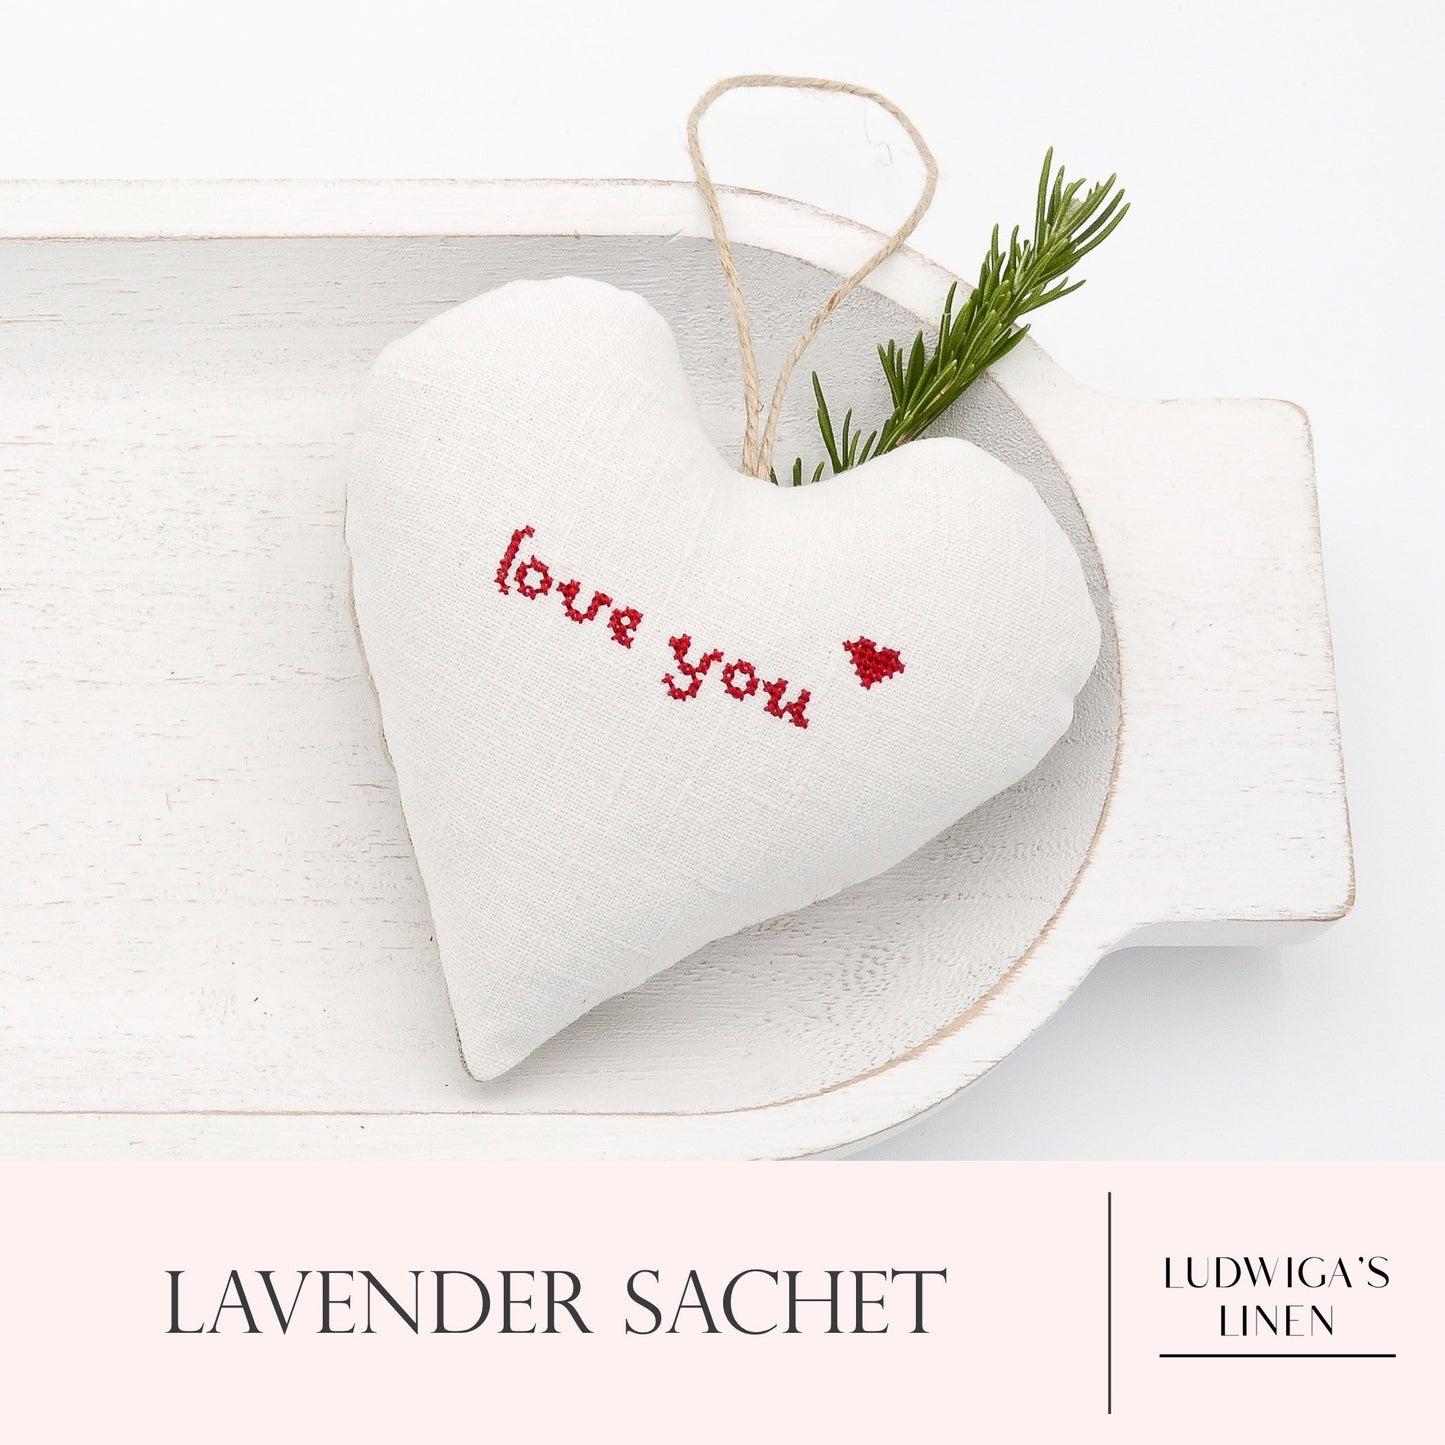 Antique/vintage European white linen lavender sachet heart with "love you" embroidered in red, hemp twine tie and filled with high quality lavender from Provence France